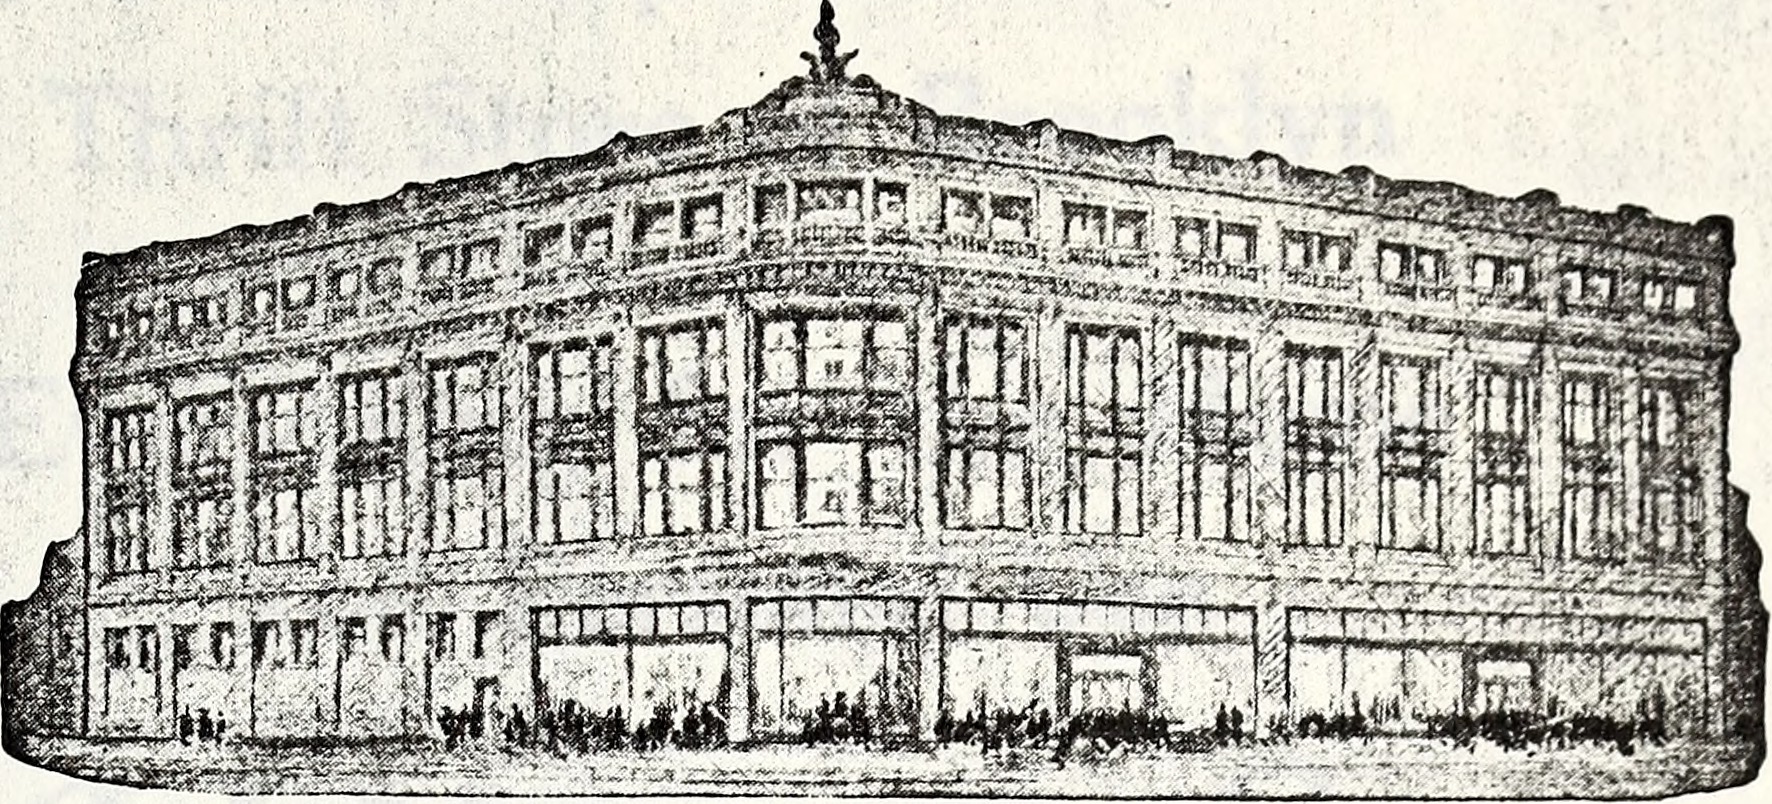 Image from page 50 of "Brooklyn and Queens, New York, copartnership and corporation directory" (1922)